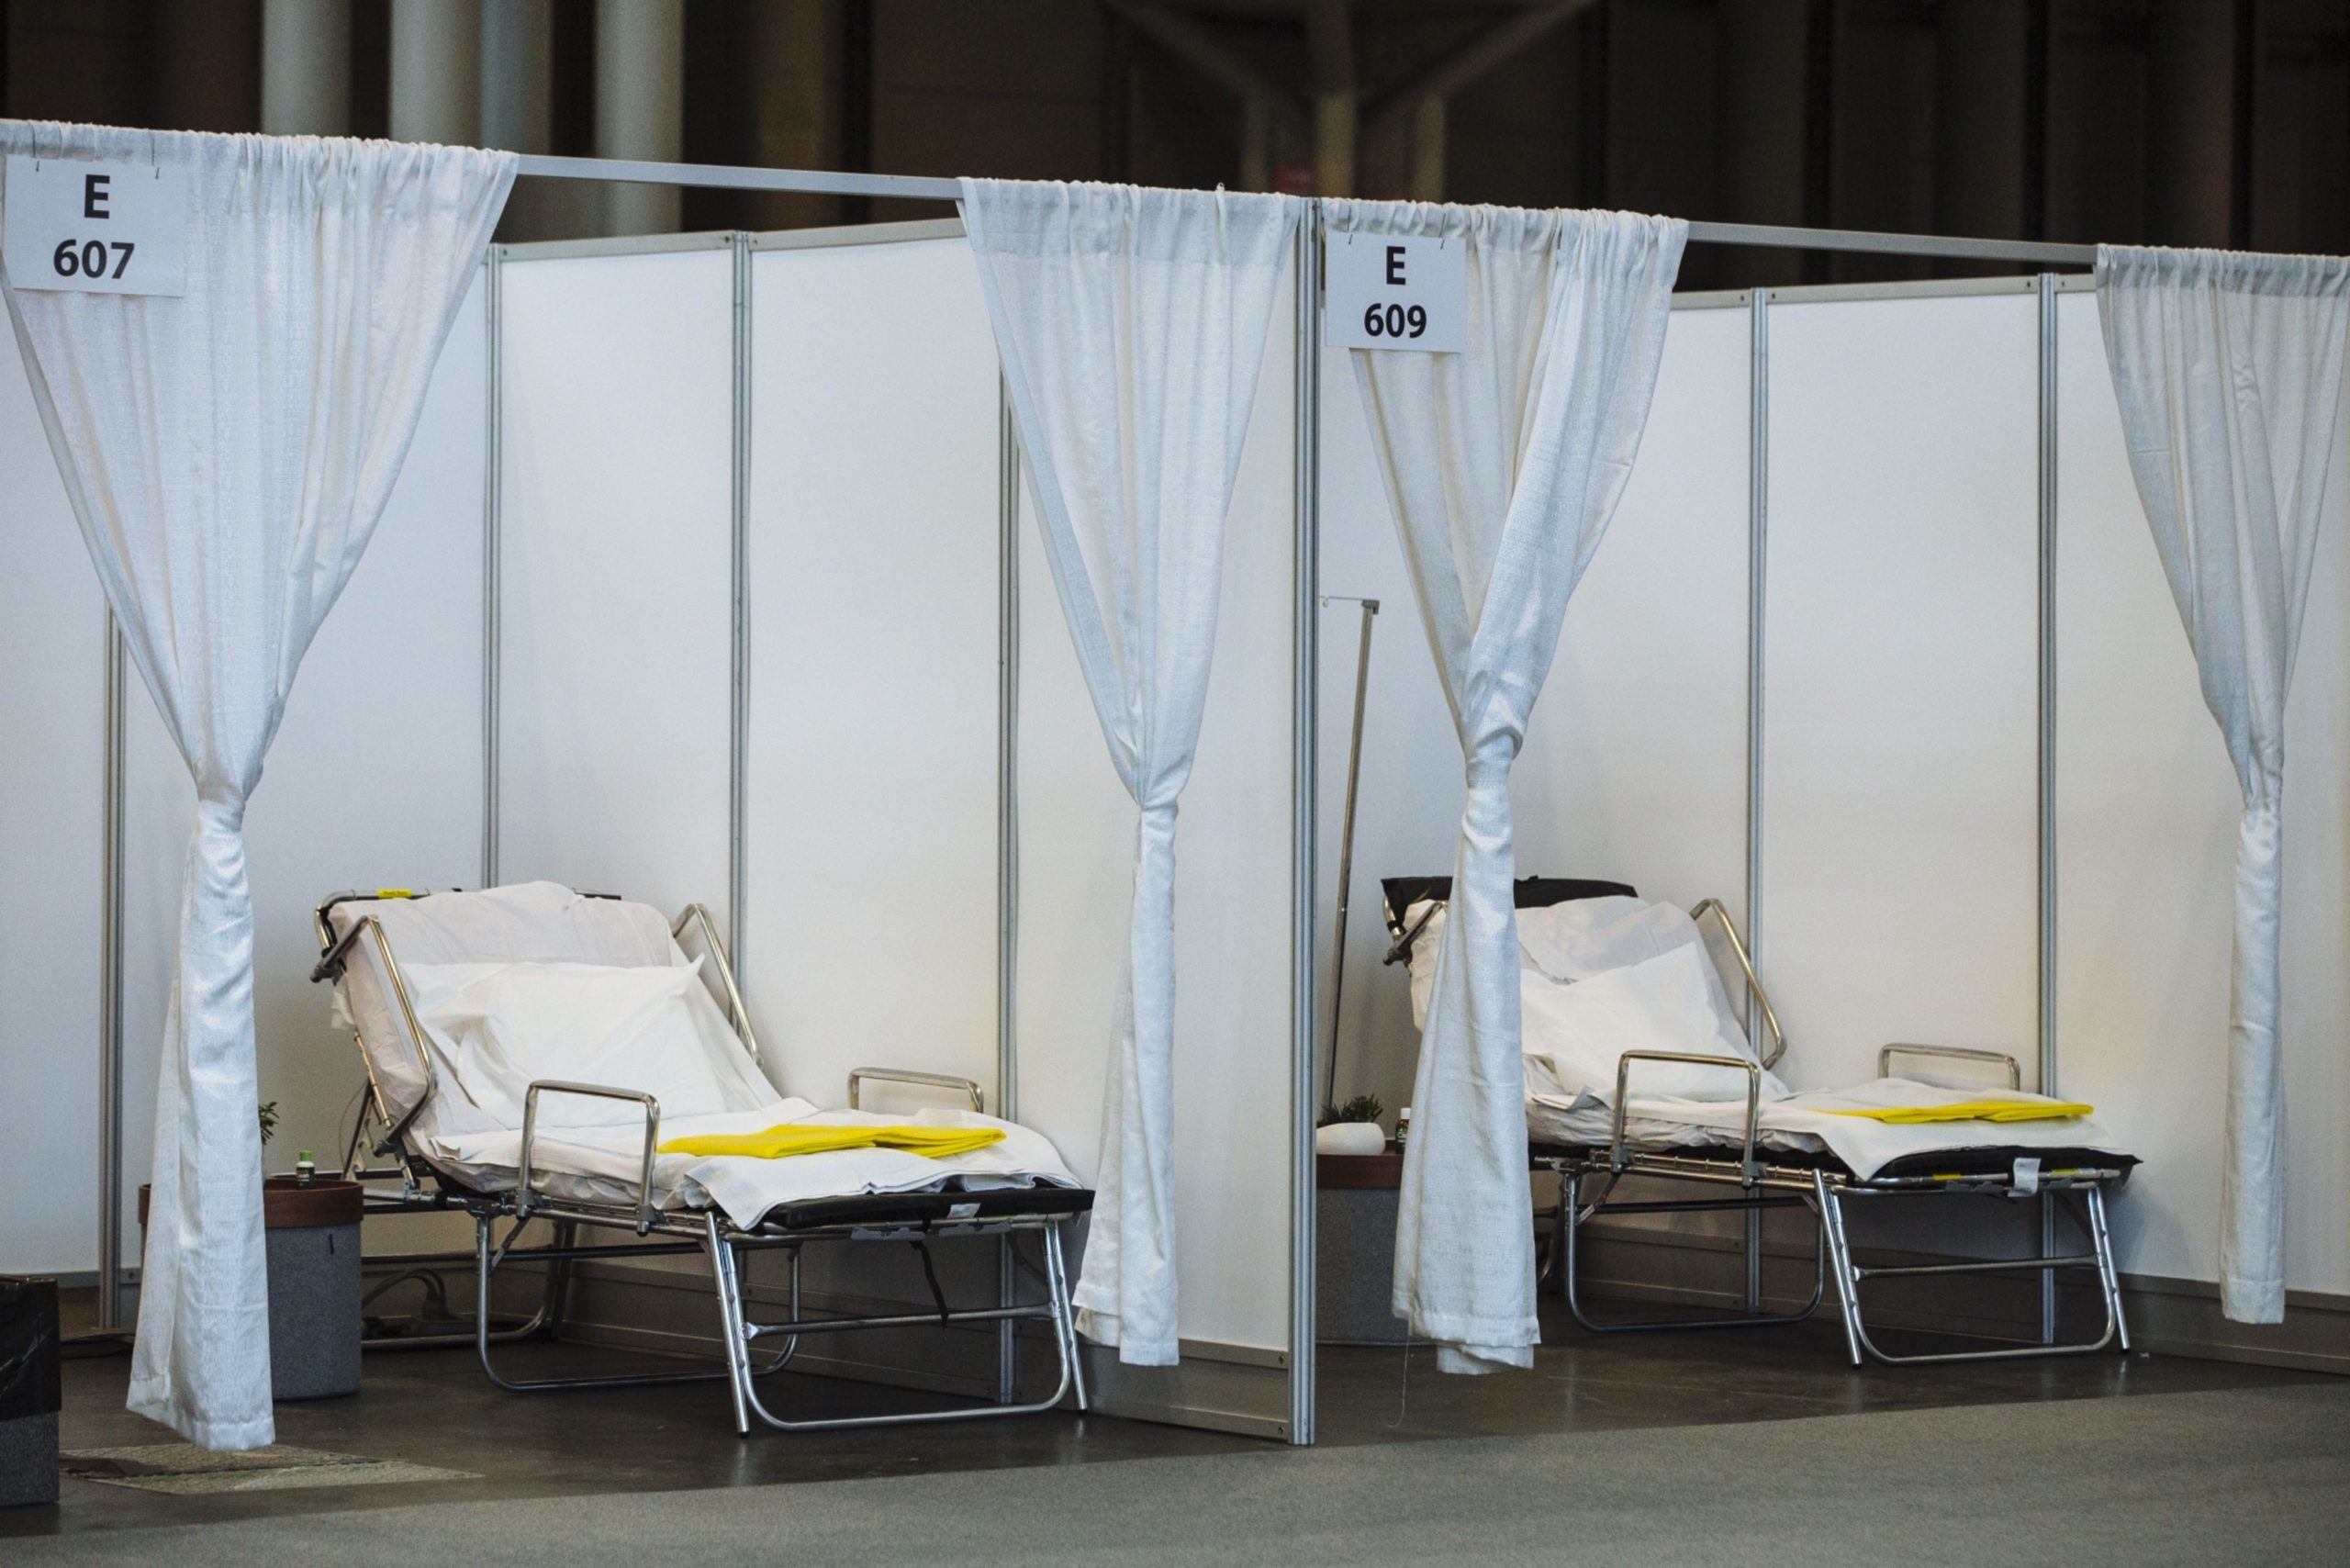 Rooms for patients are set up at a temporary hospital in the Jacob Javits Convention Center in New York, U.S., on Friday, March 27, 2020. New York Governor Andrew Cuomo said he would seek federal assistance for four new emergency hospitals as the number of deaths statewide from the new coronavirus spiked 35% in a day to more than 500. Photographer: Angus Mordant/Bloomberg